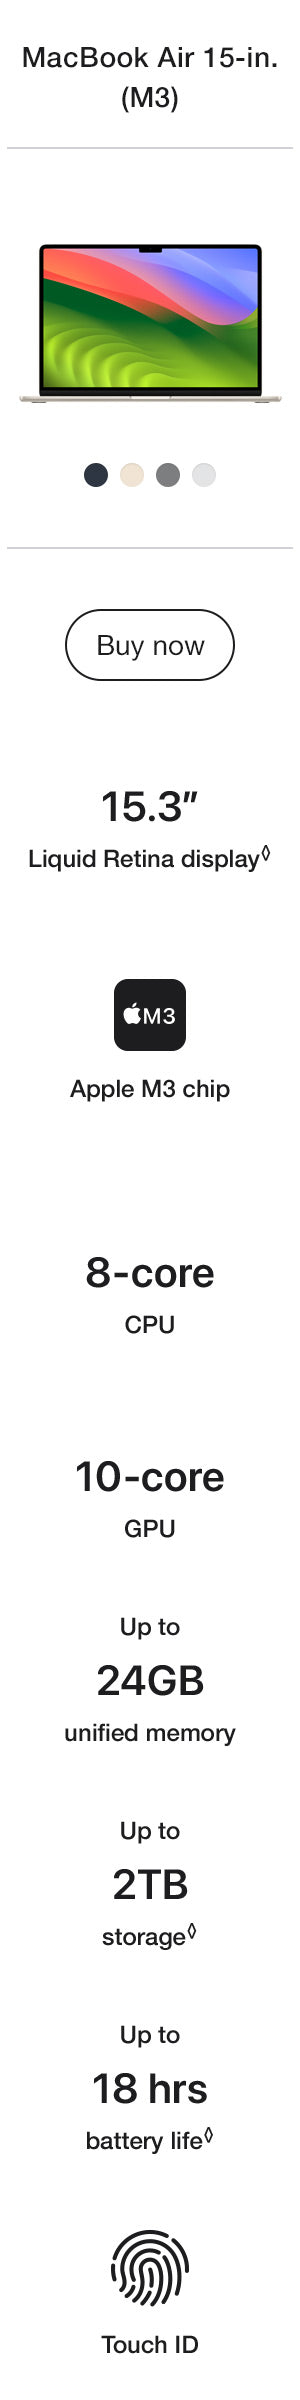 jb-au-20240305-computers-apple-macbook-compare-images-air-15in-m3-buy.jpg__PID:021f6161-eb8c-46a2-8850-a452133c45c3